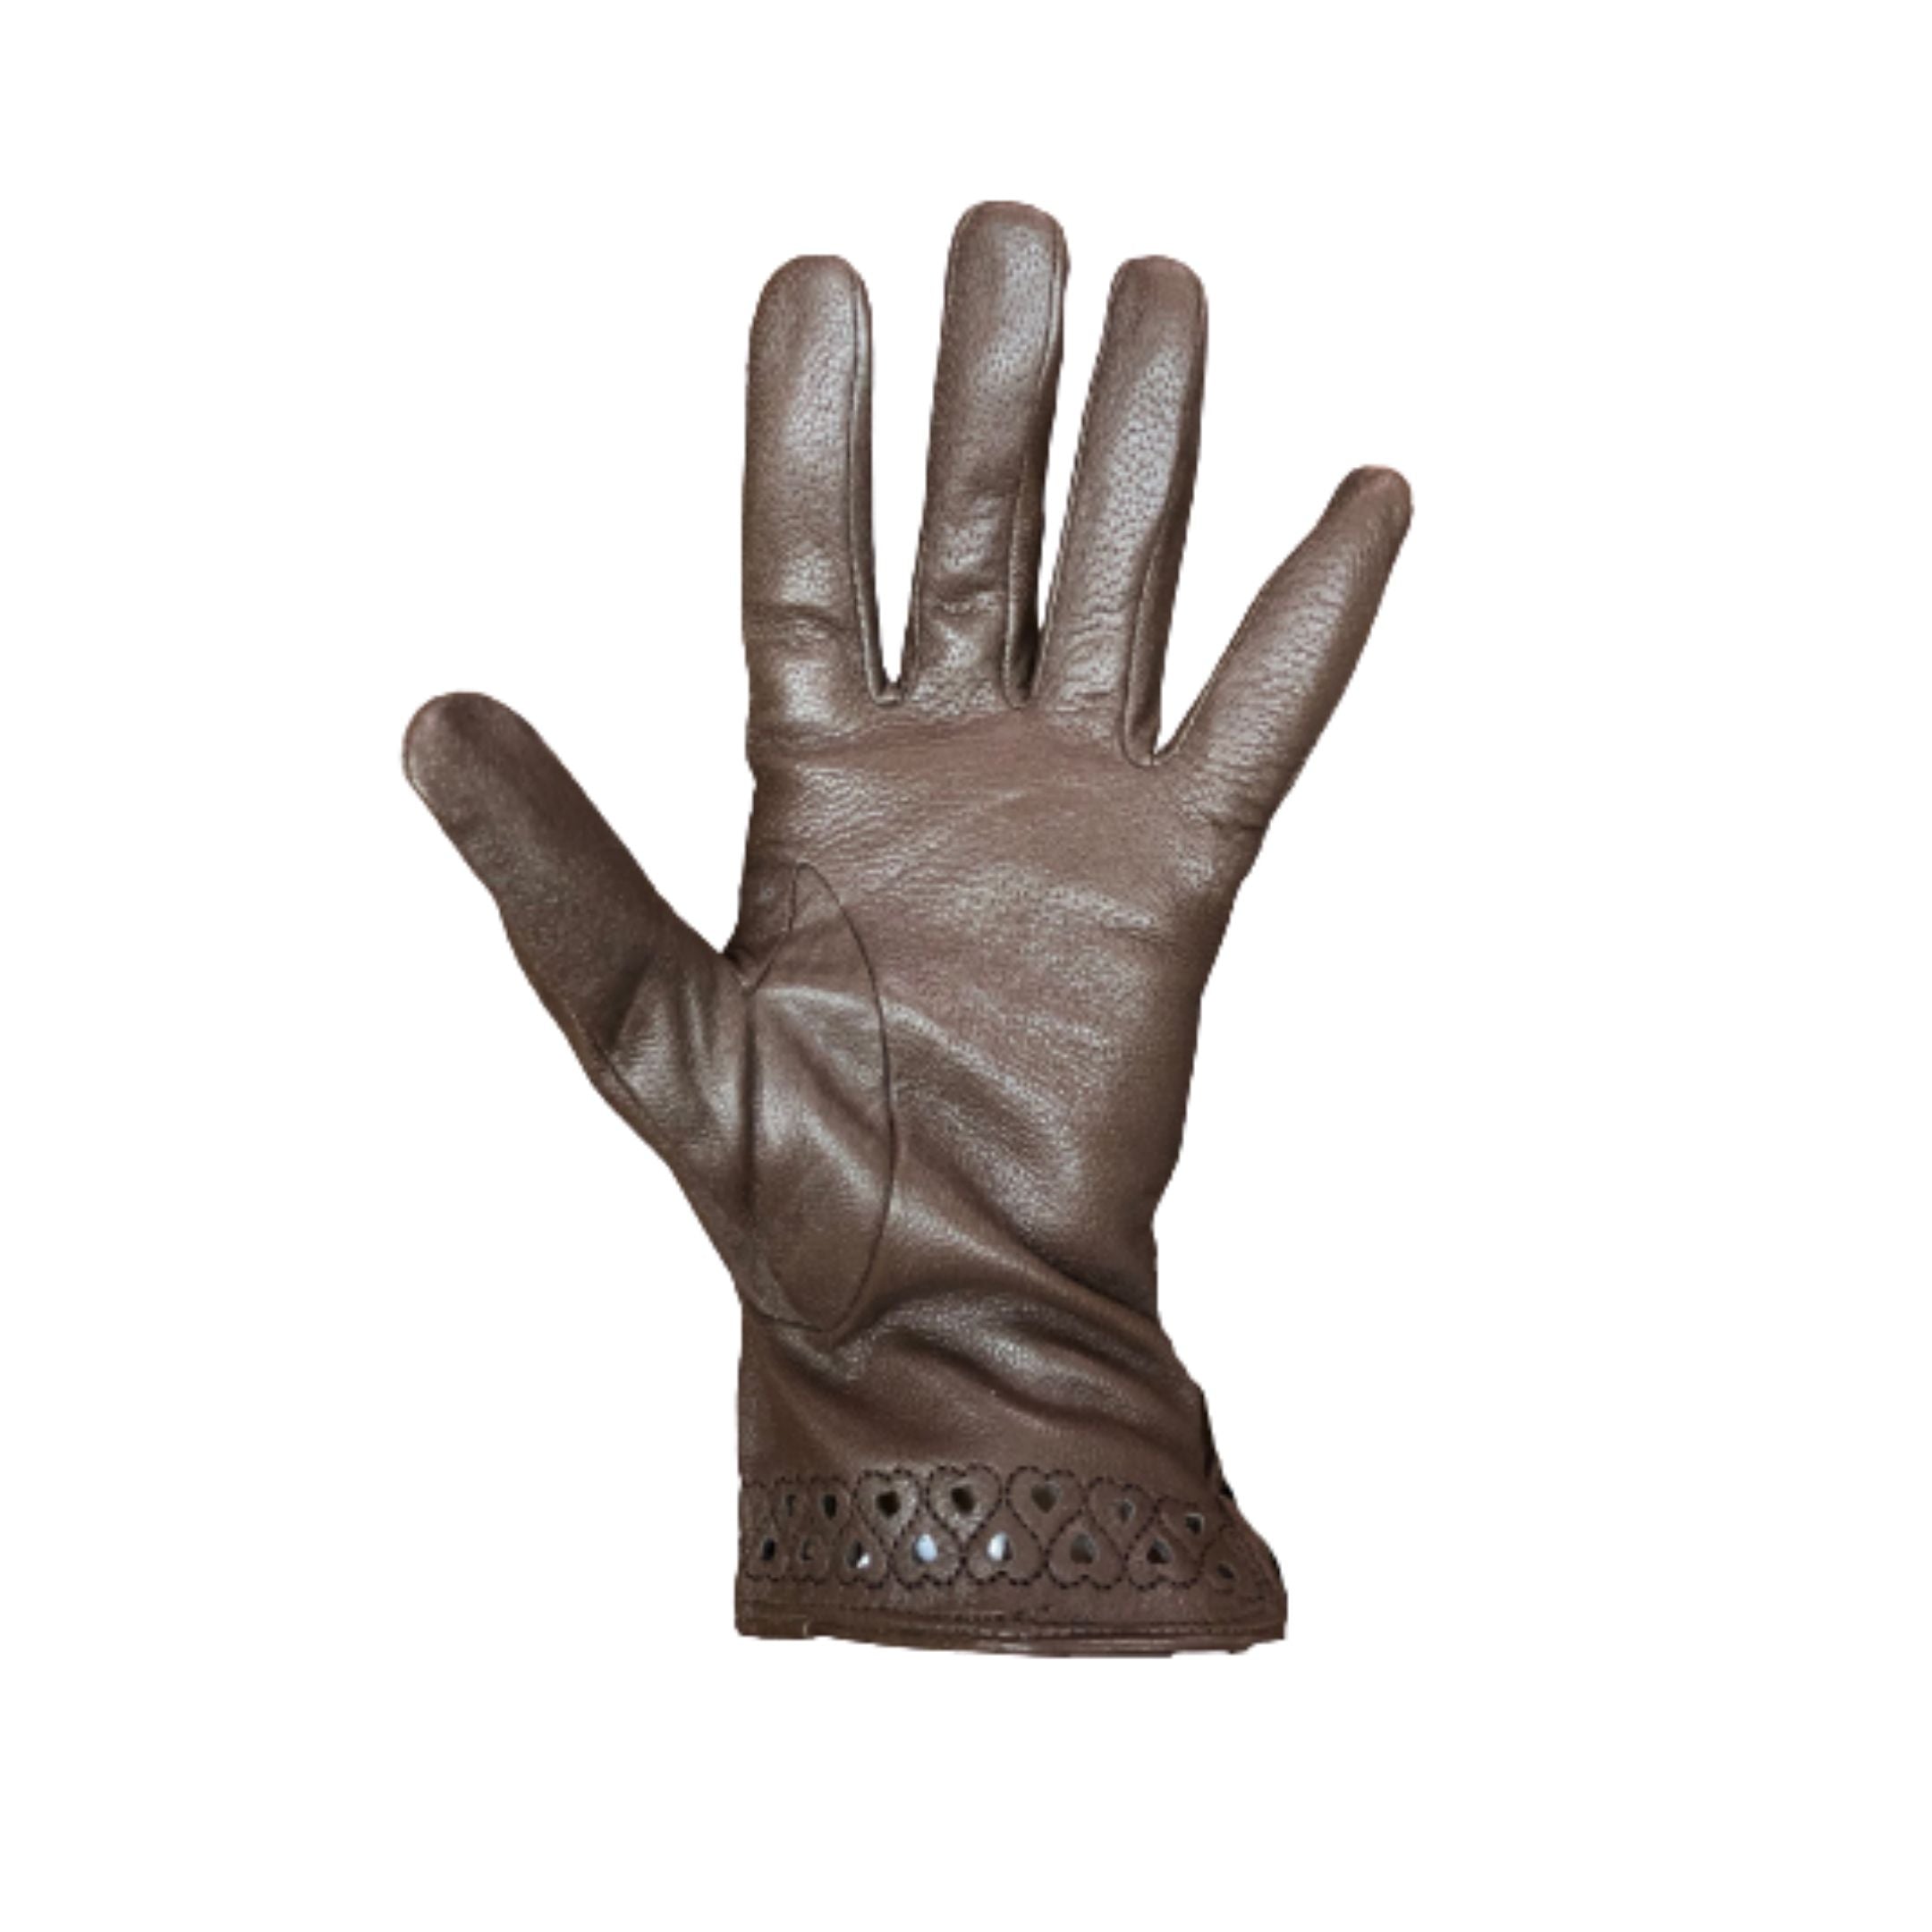 Palm side of brown leather finger gloves with heart shaped detailed stitching around the cuffs